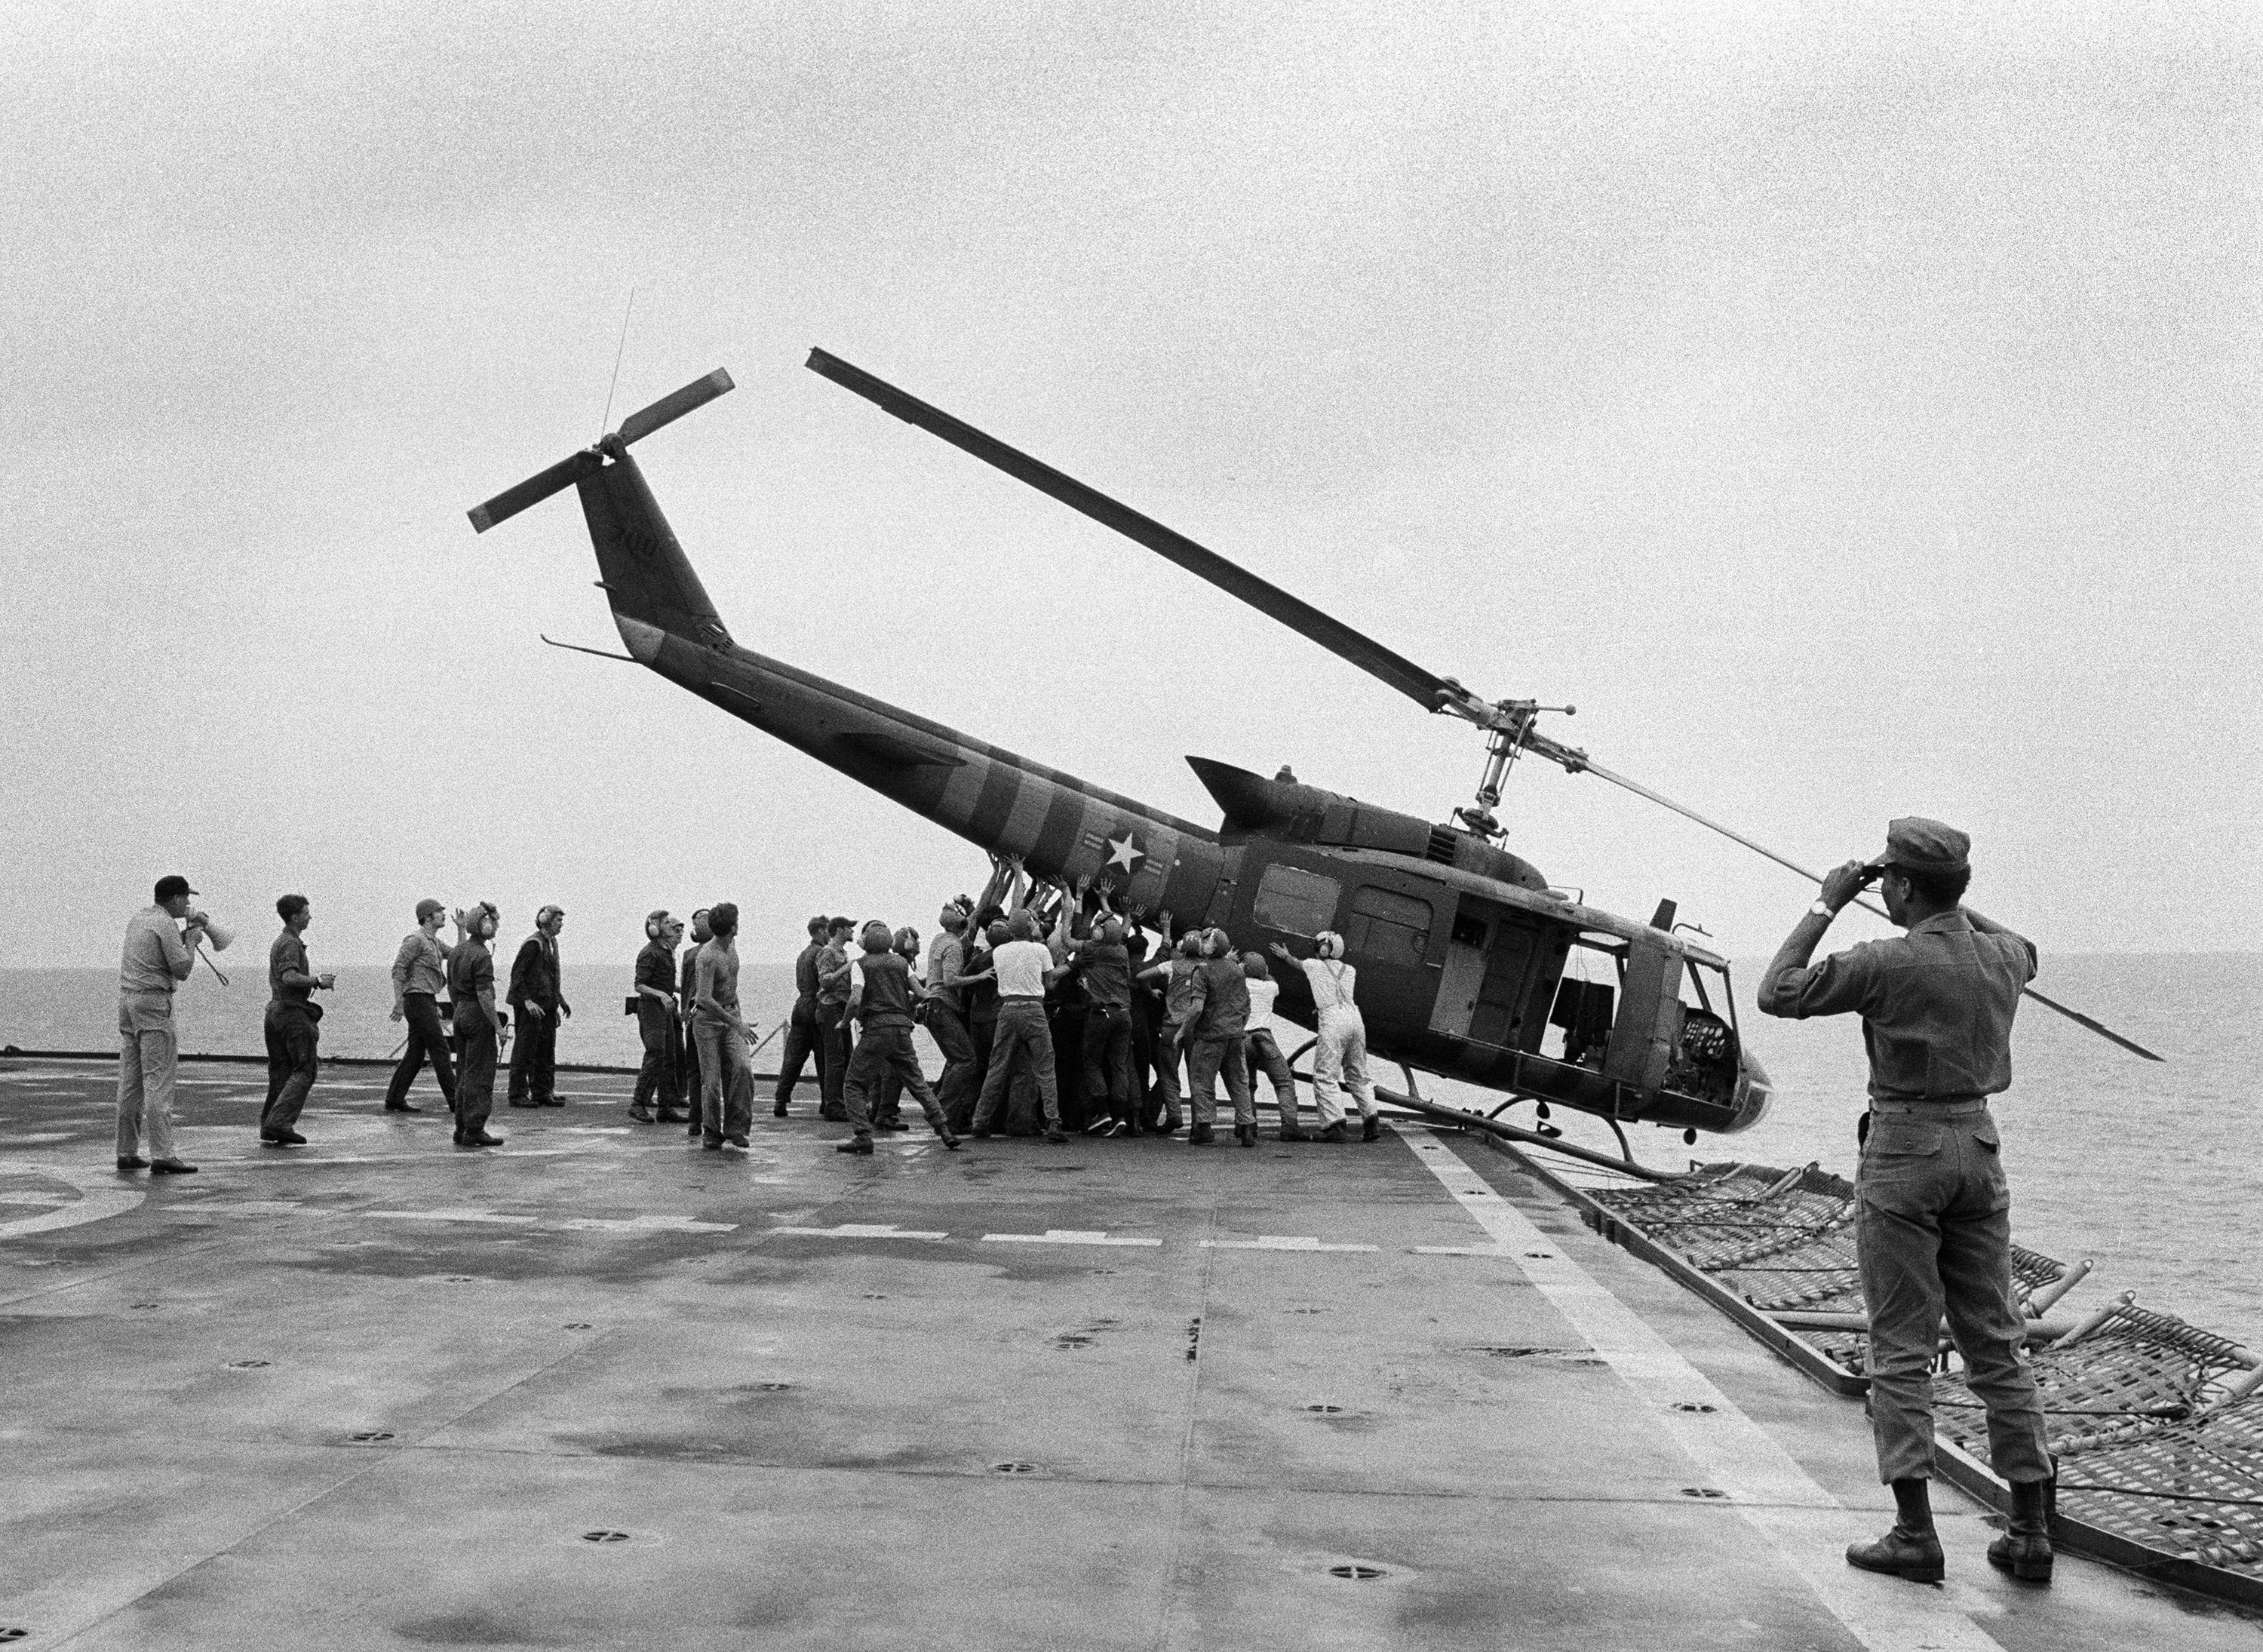 U.S. Navy personnel aboard the USS Blue Ridge push a helicopter into the sea off the coast of Vietnam in order to make room for more evacuation flights from Saigon, Tuesday, April 29, 1975.  The helicopter had carried Vietnamese fleeing Saigon as North Vietnamese forces closed in on the capitol.  (AP Photo/jt)